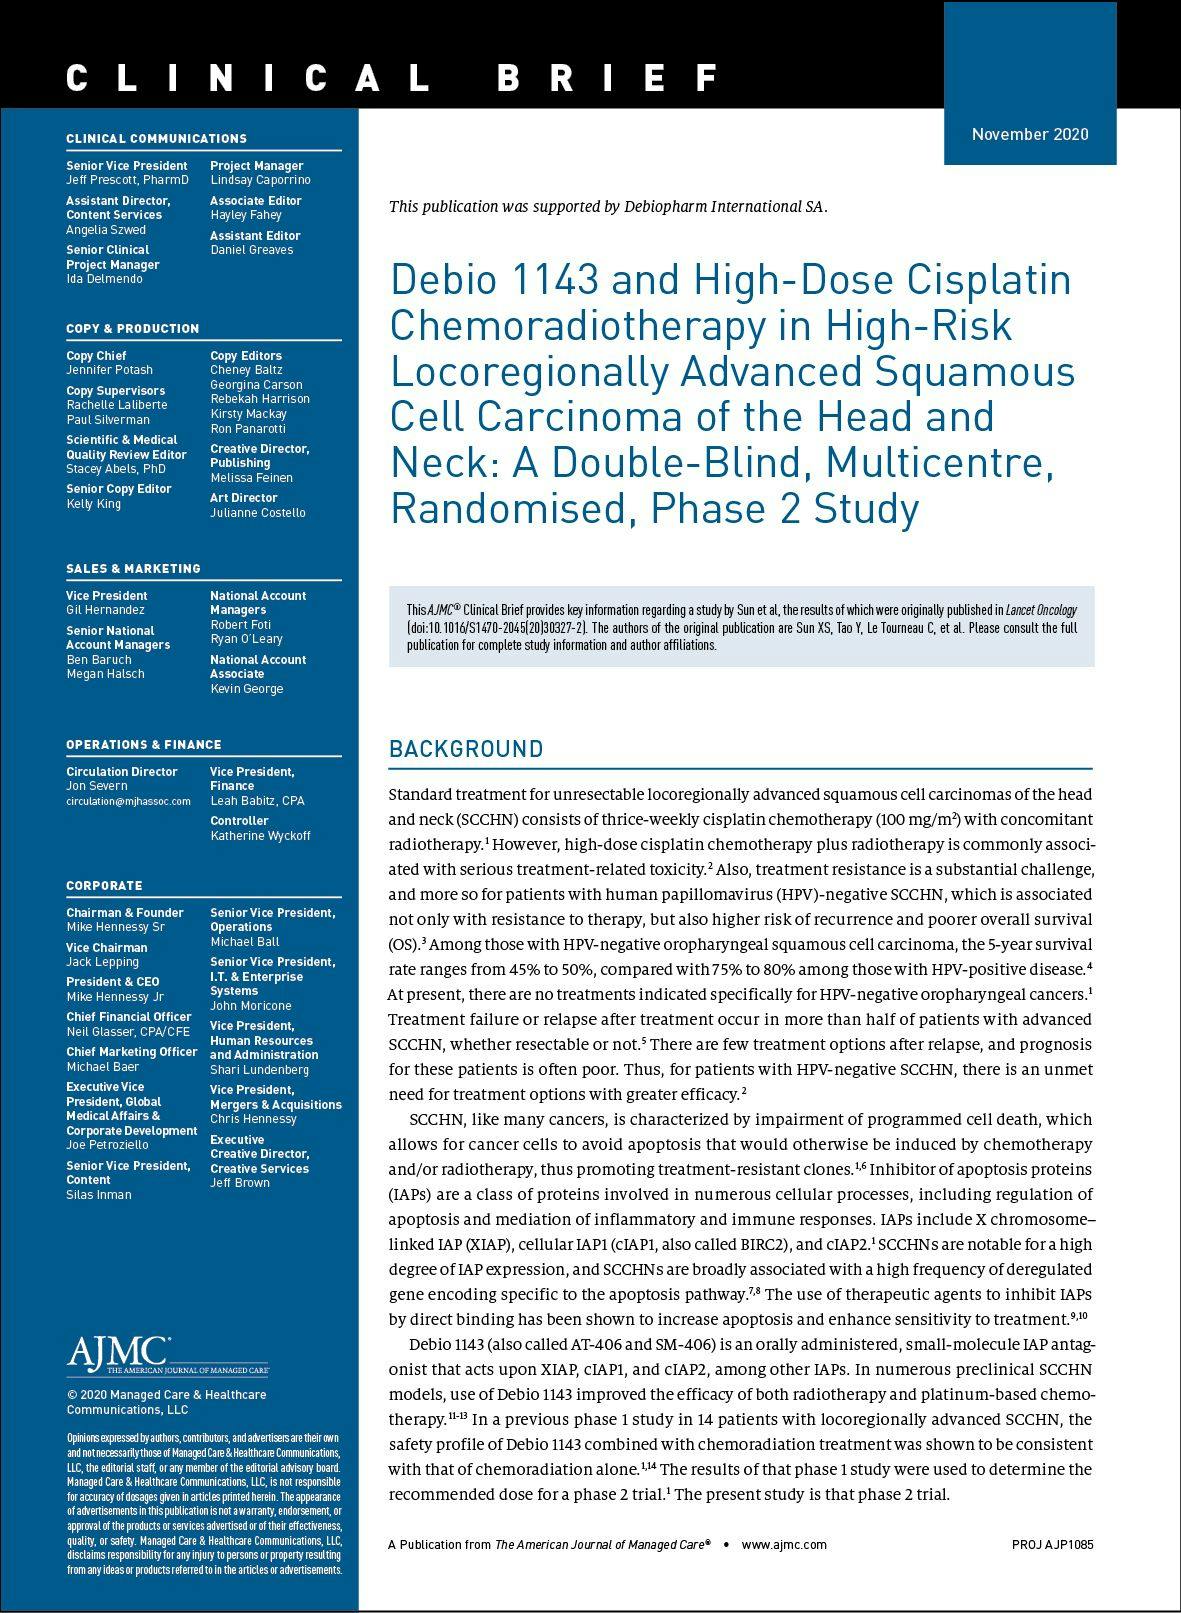 Debio 1143 and High-Dose Cisplatin Chemoradiotherapy in High-Risk Locoregionally Advanced Squamous Cell Carcinoma of the Head and Neck: A Double-Blind, Multicentre, Randomised, Phase 2 Study